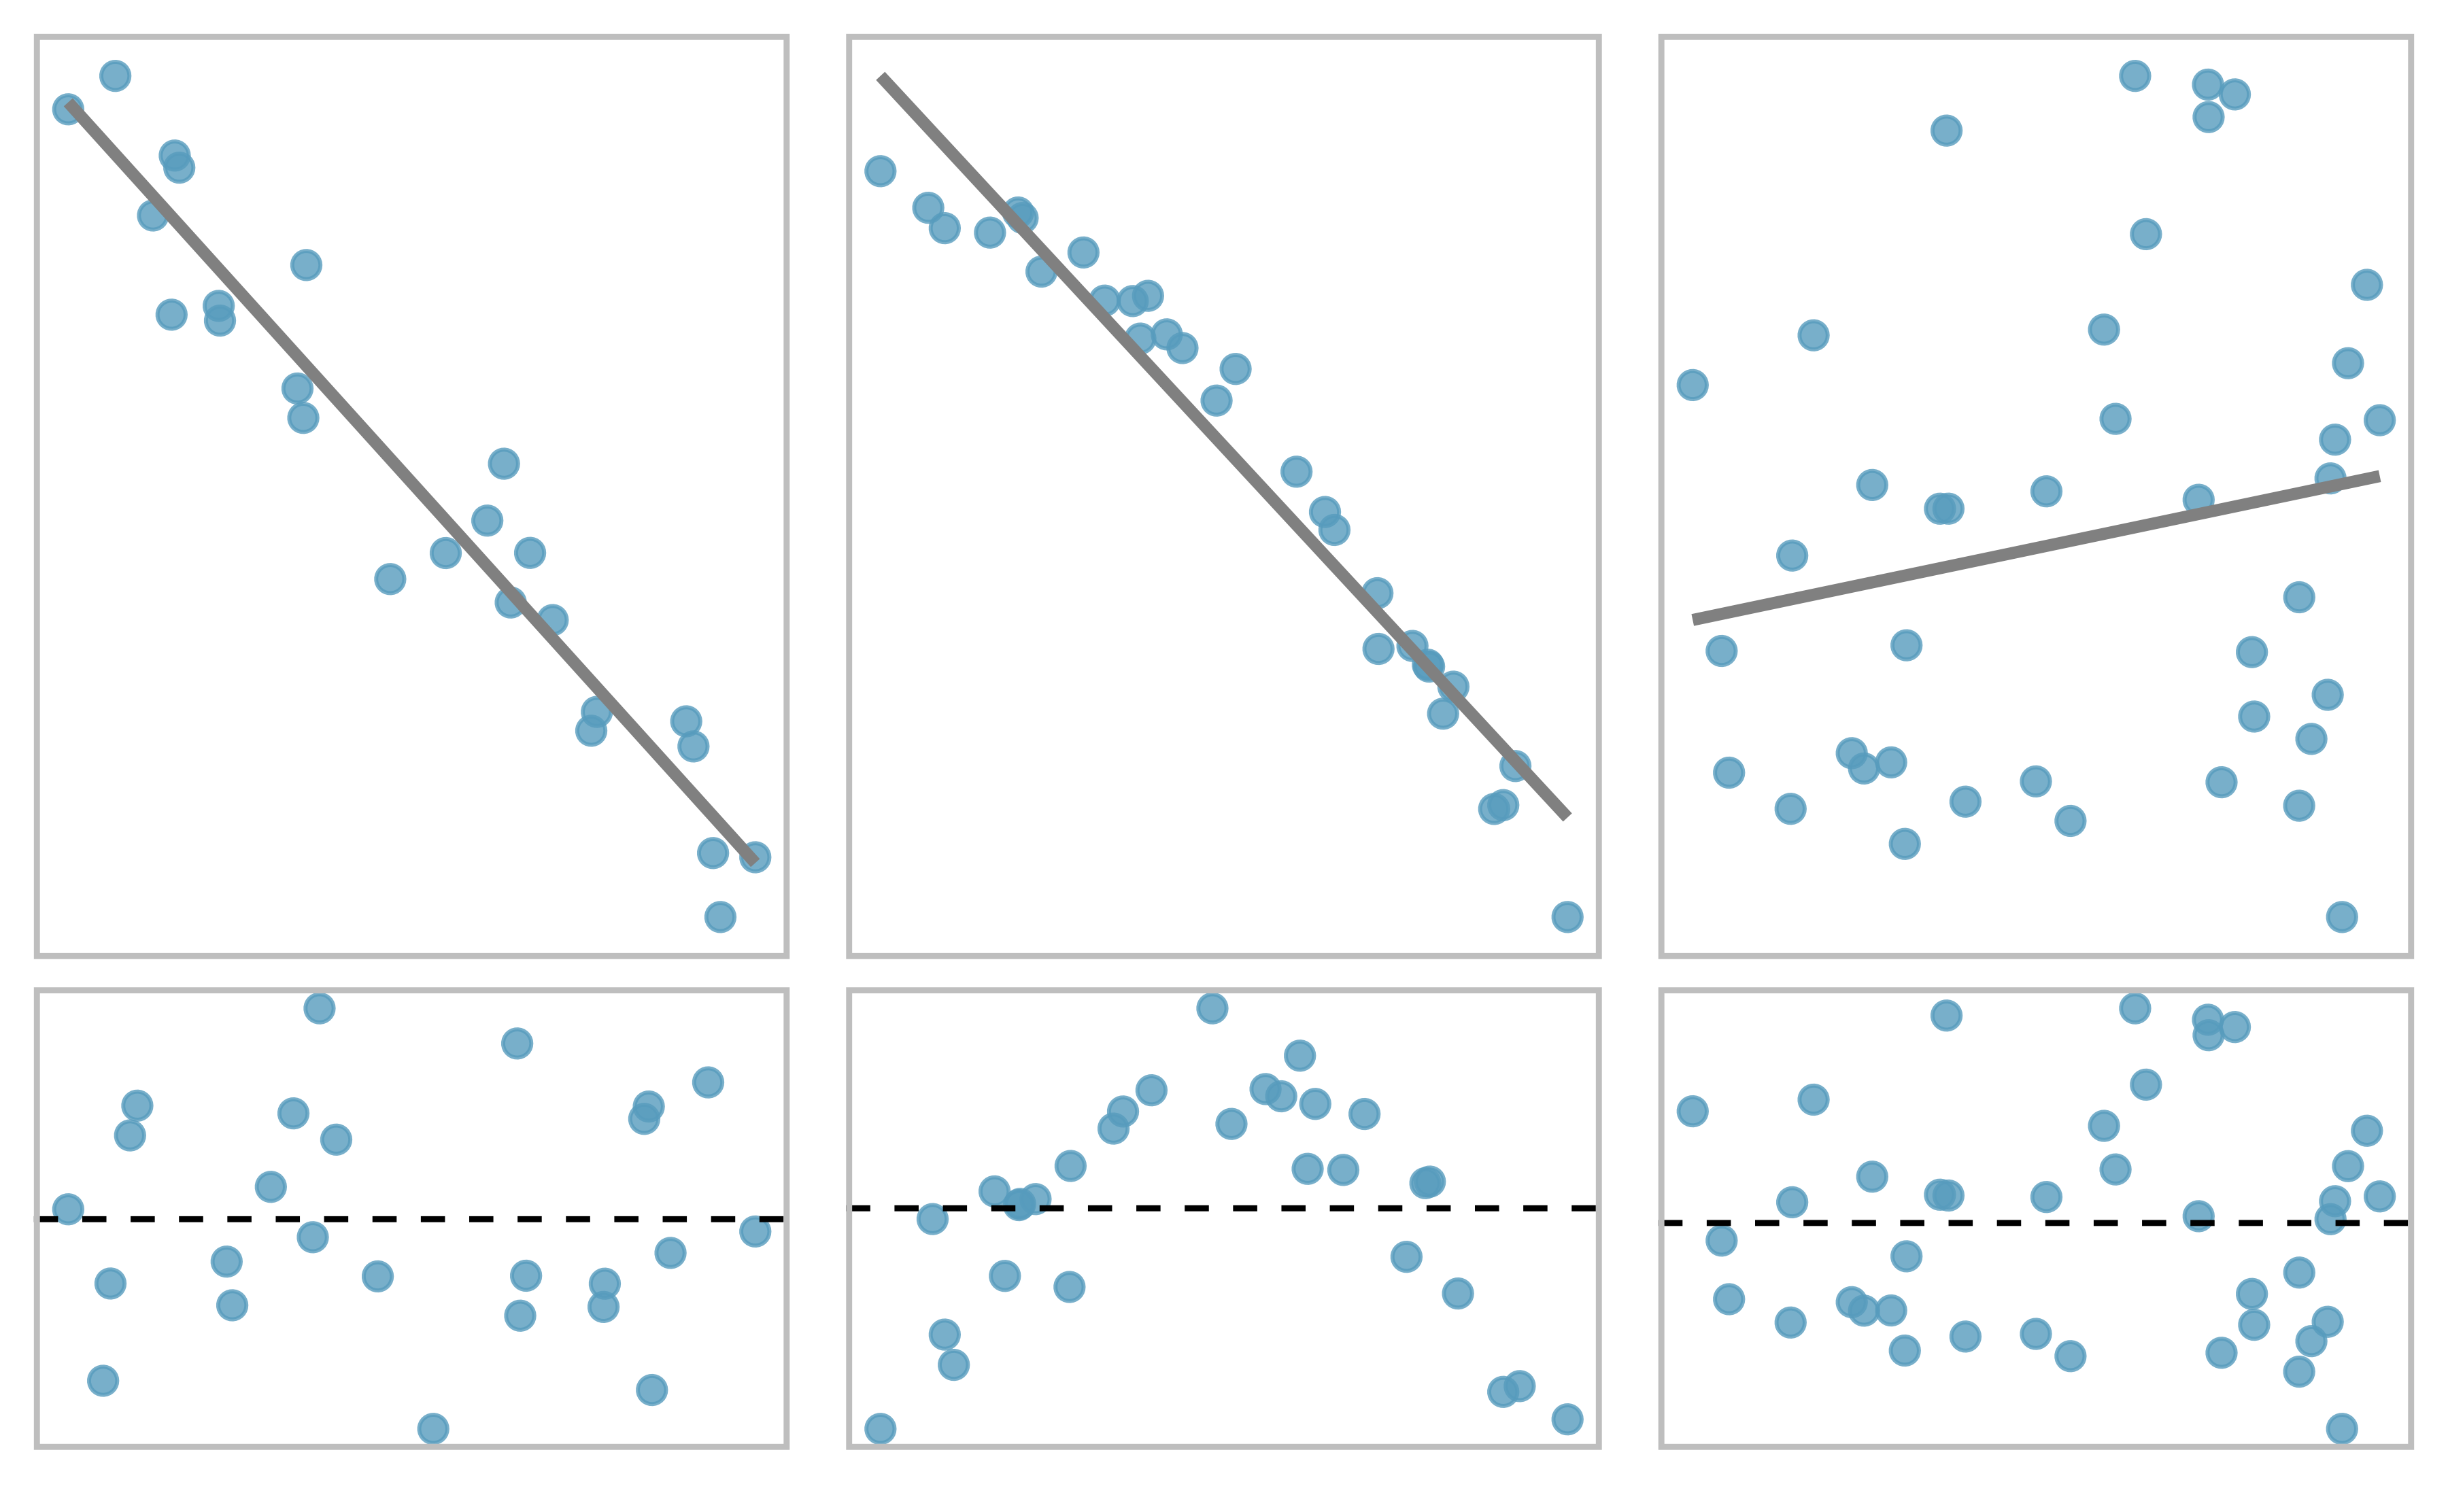 Sample data with their best fitting lines (top row) and their corresponding residual plots (bottom row).